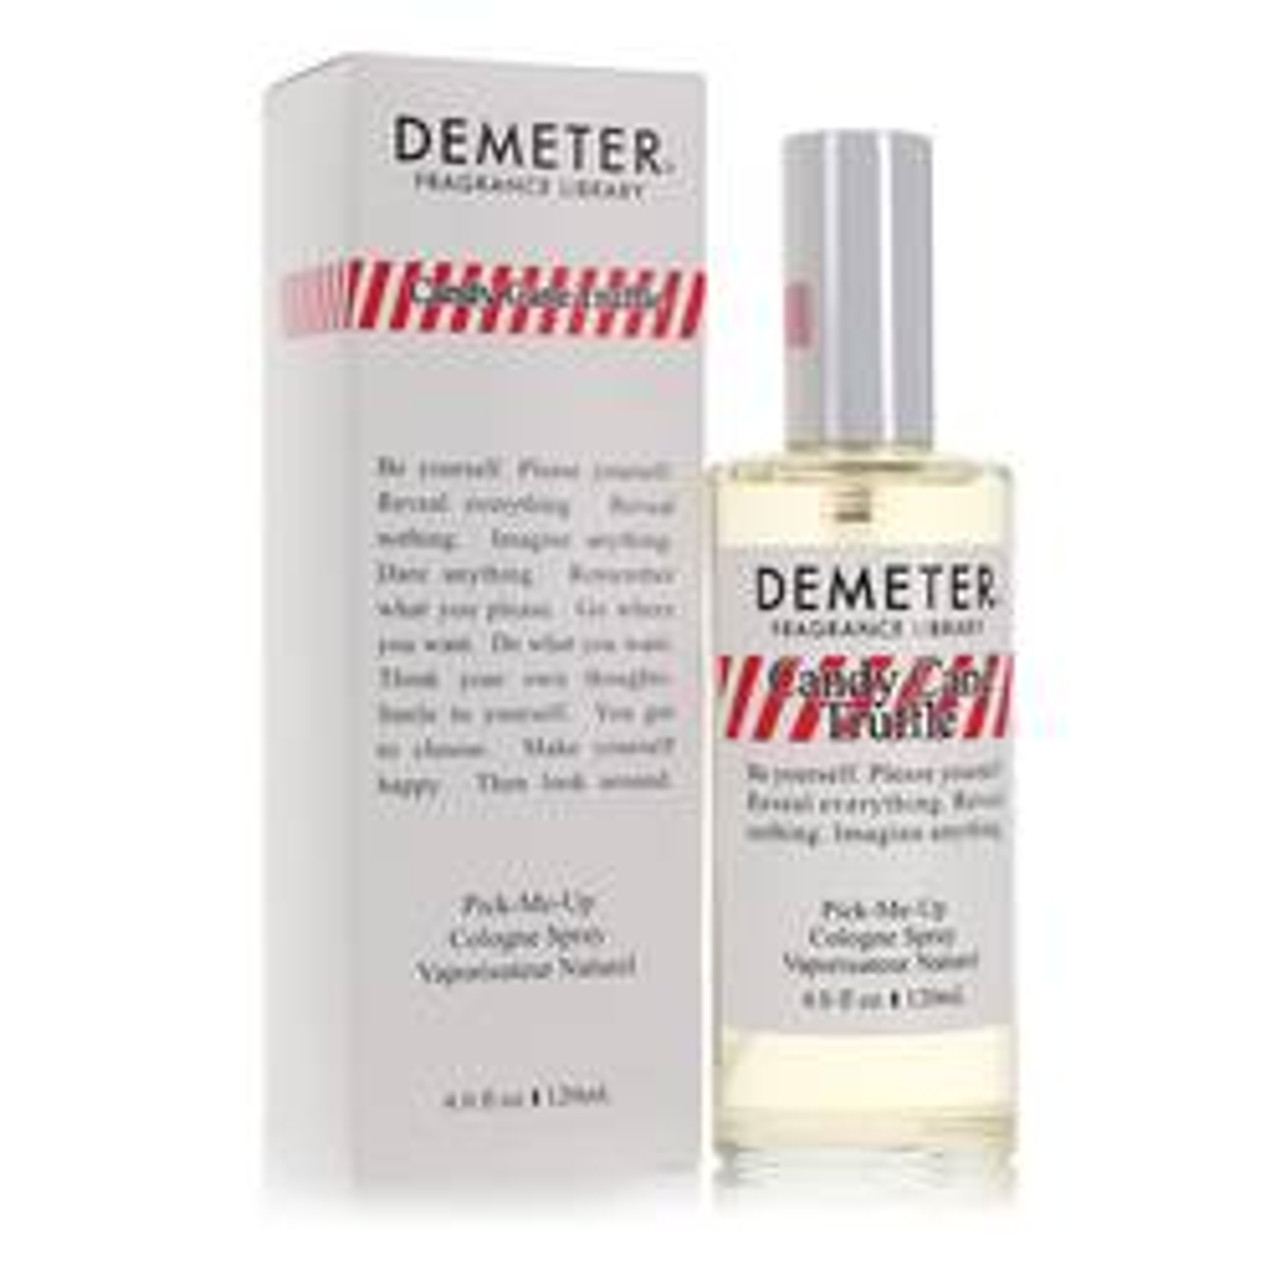 Demeter Candy Cane Truffle Perfume By Demeter Cologne Spray 4 oz for Women - [From 79.50 - Choose pk Qty ] - *Ships from Miami